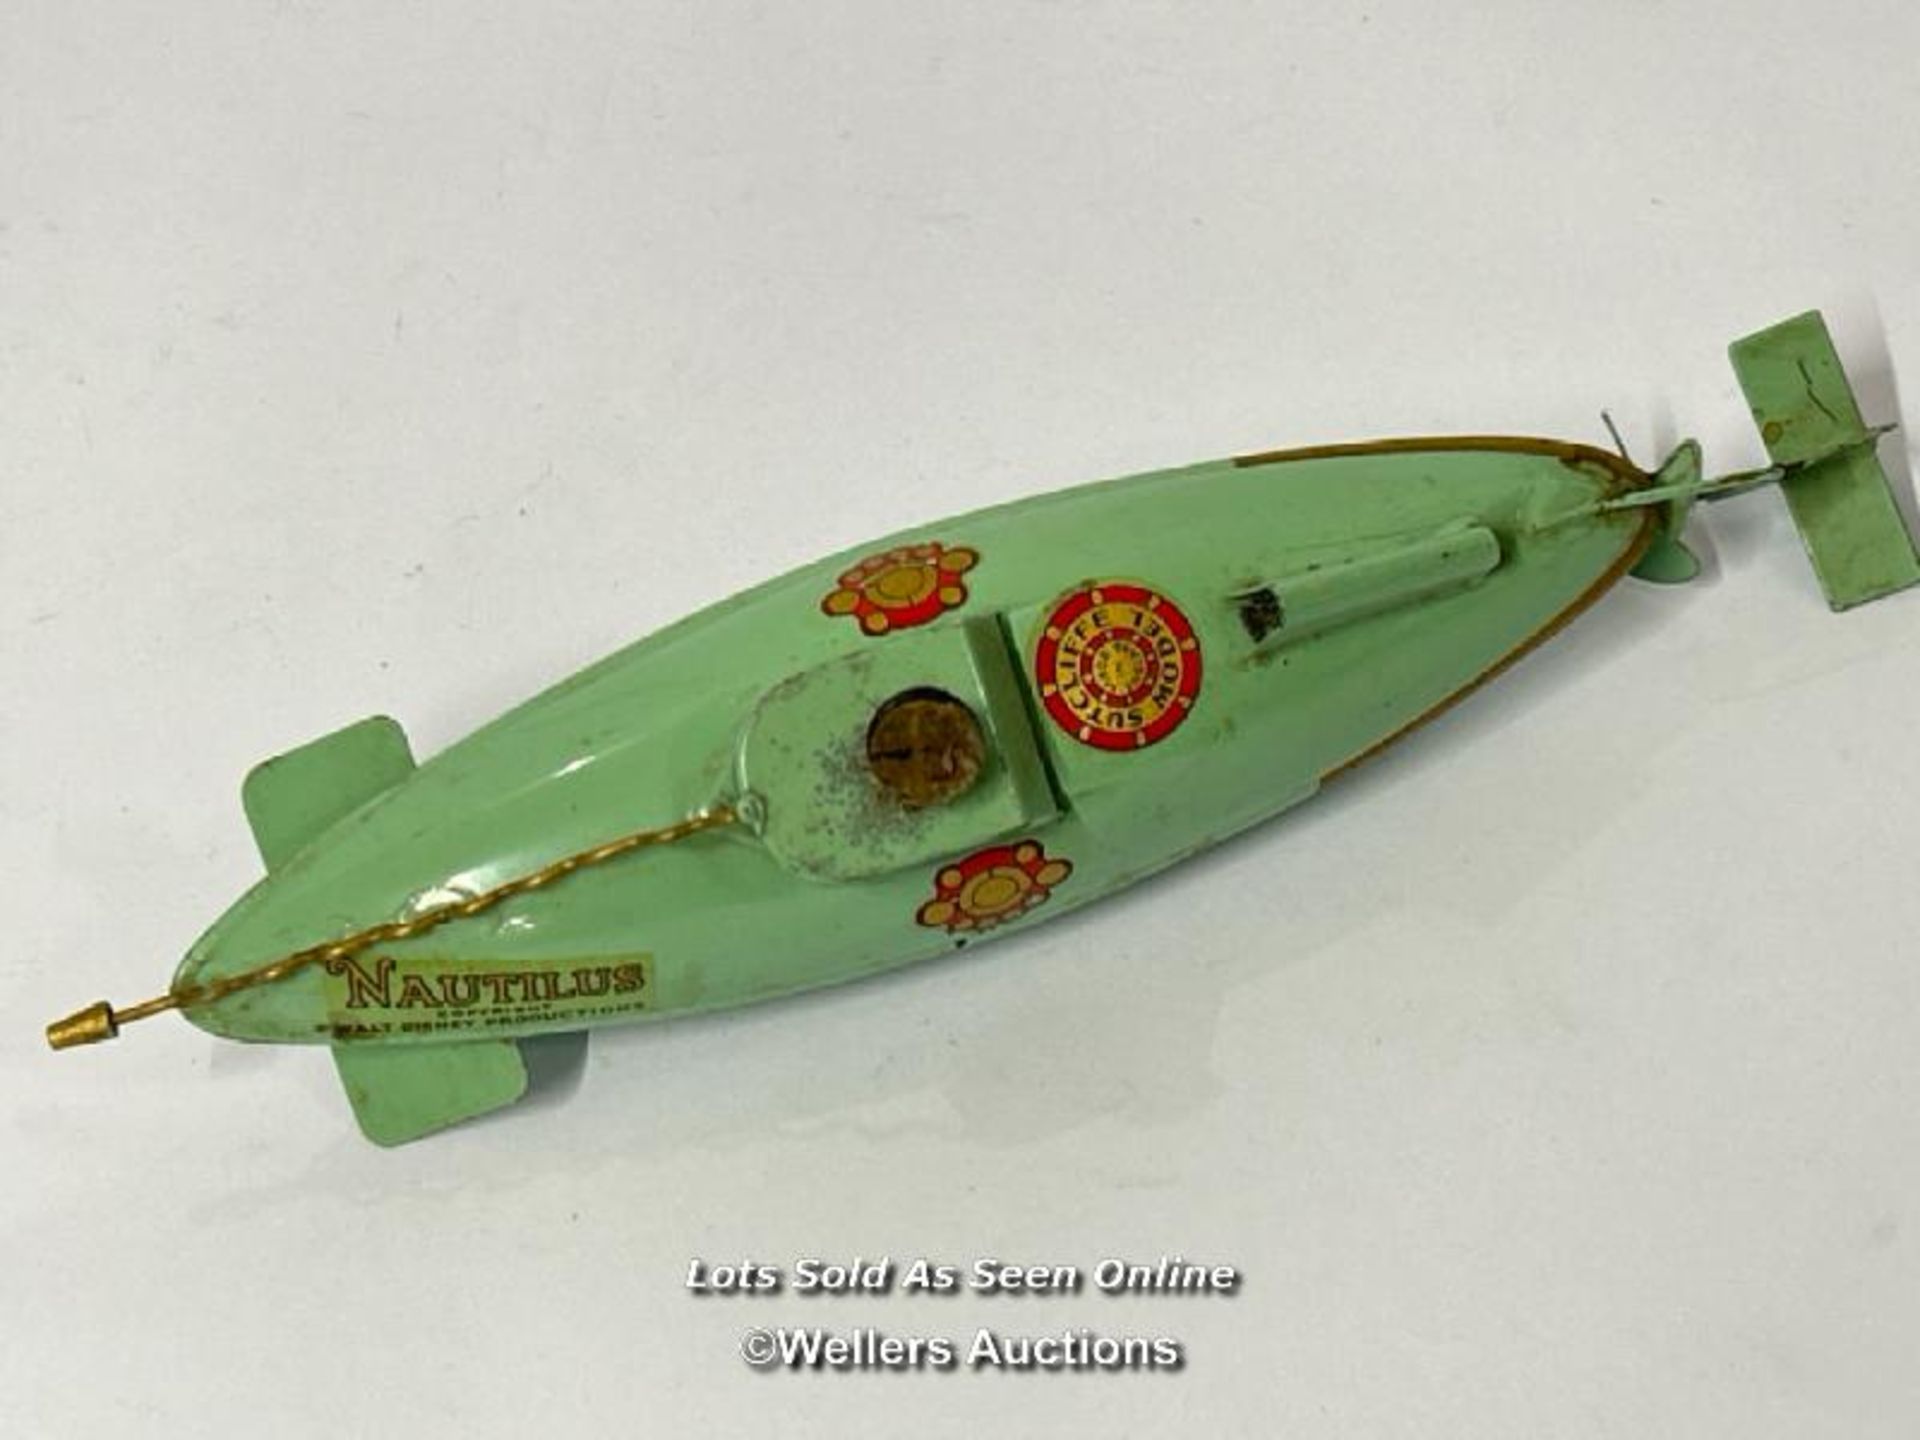 Sutcliffe models "Nautilus" tin toy from Disney's 20,000 Leagues Under the Sea, unboxed - Image 3 of 3